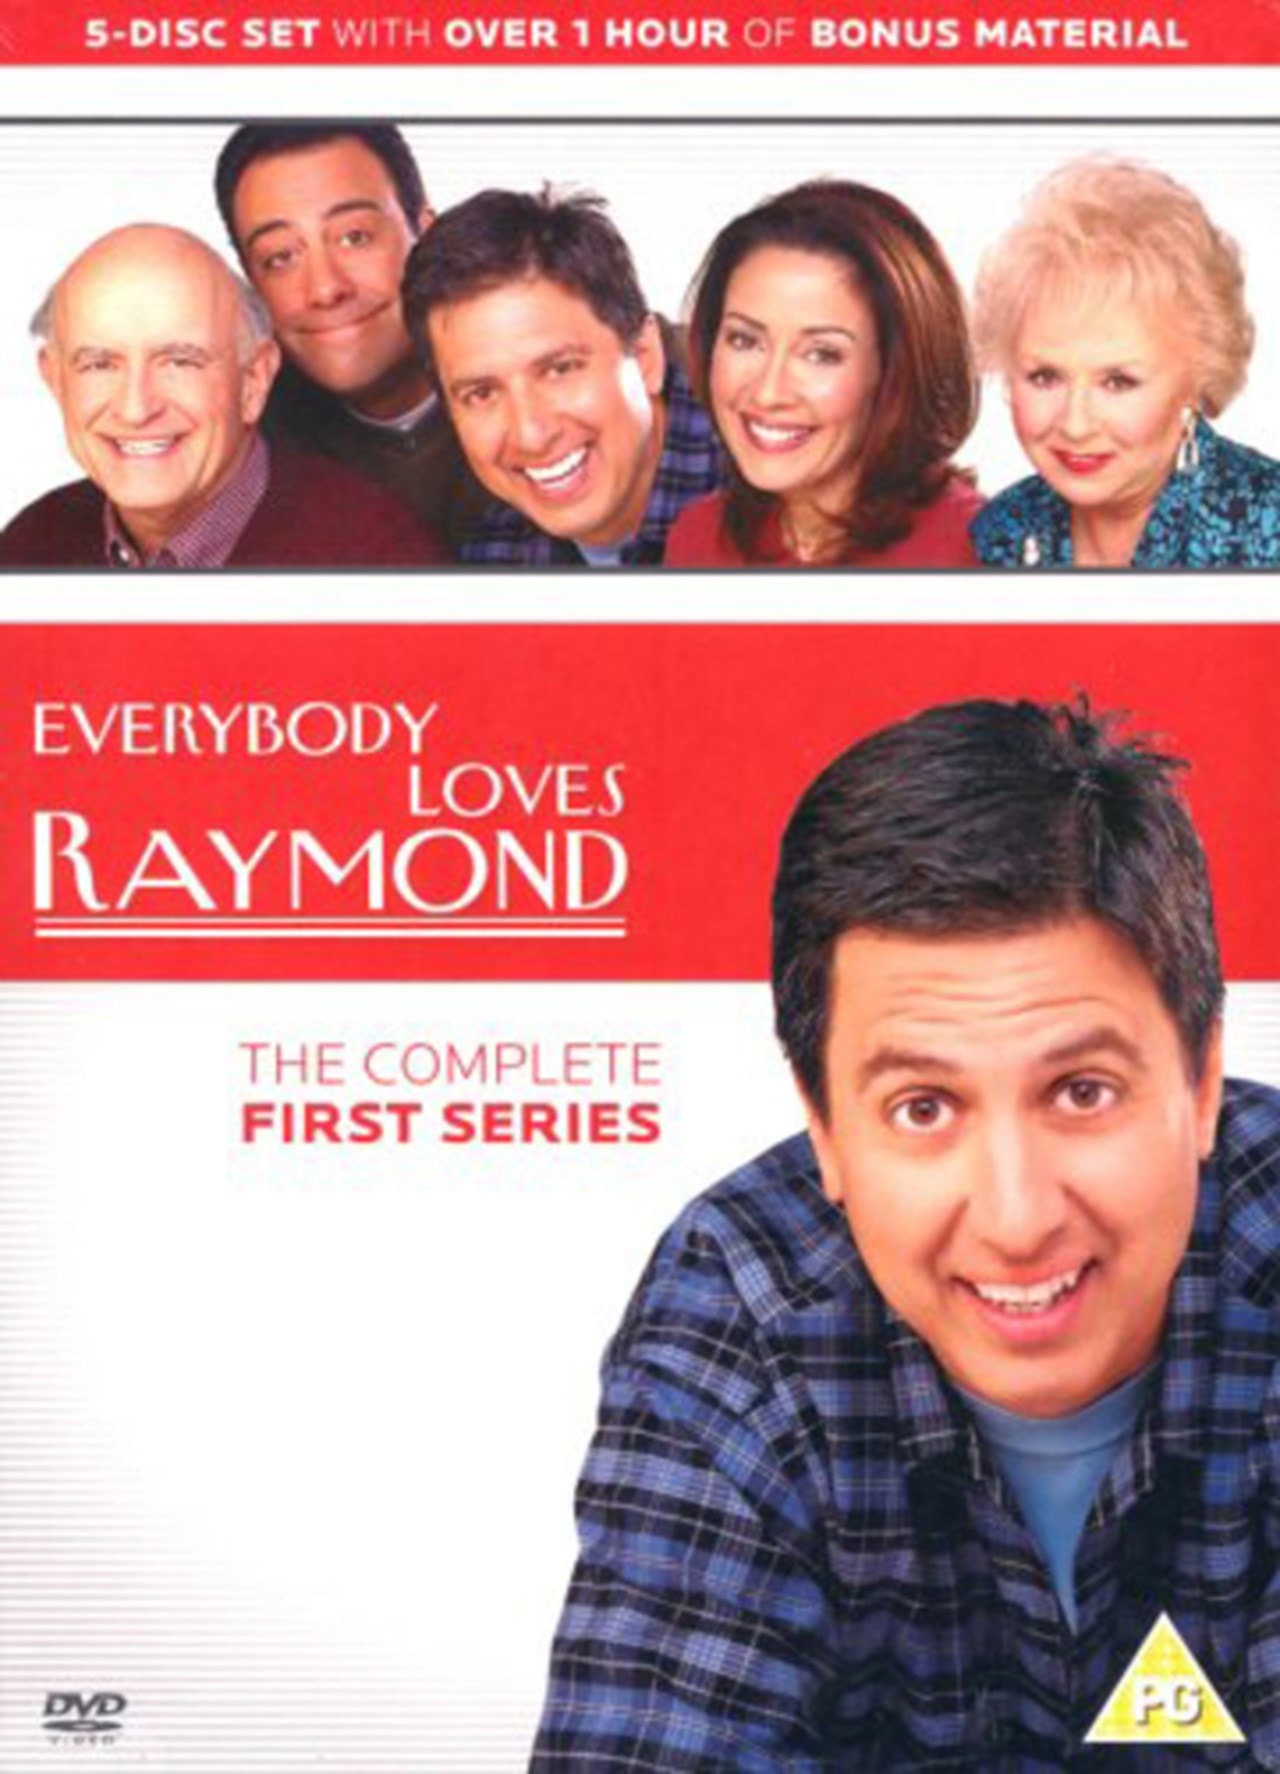 Everybody Loves Raymond The Complete First Series Dvd Box Set Free Shipping Over £20 Hmv 